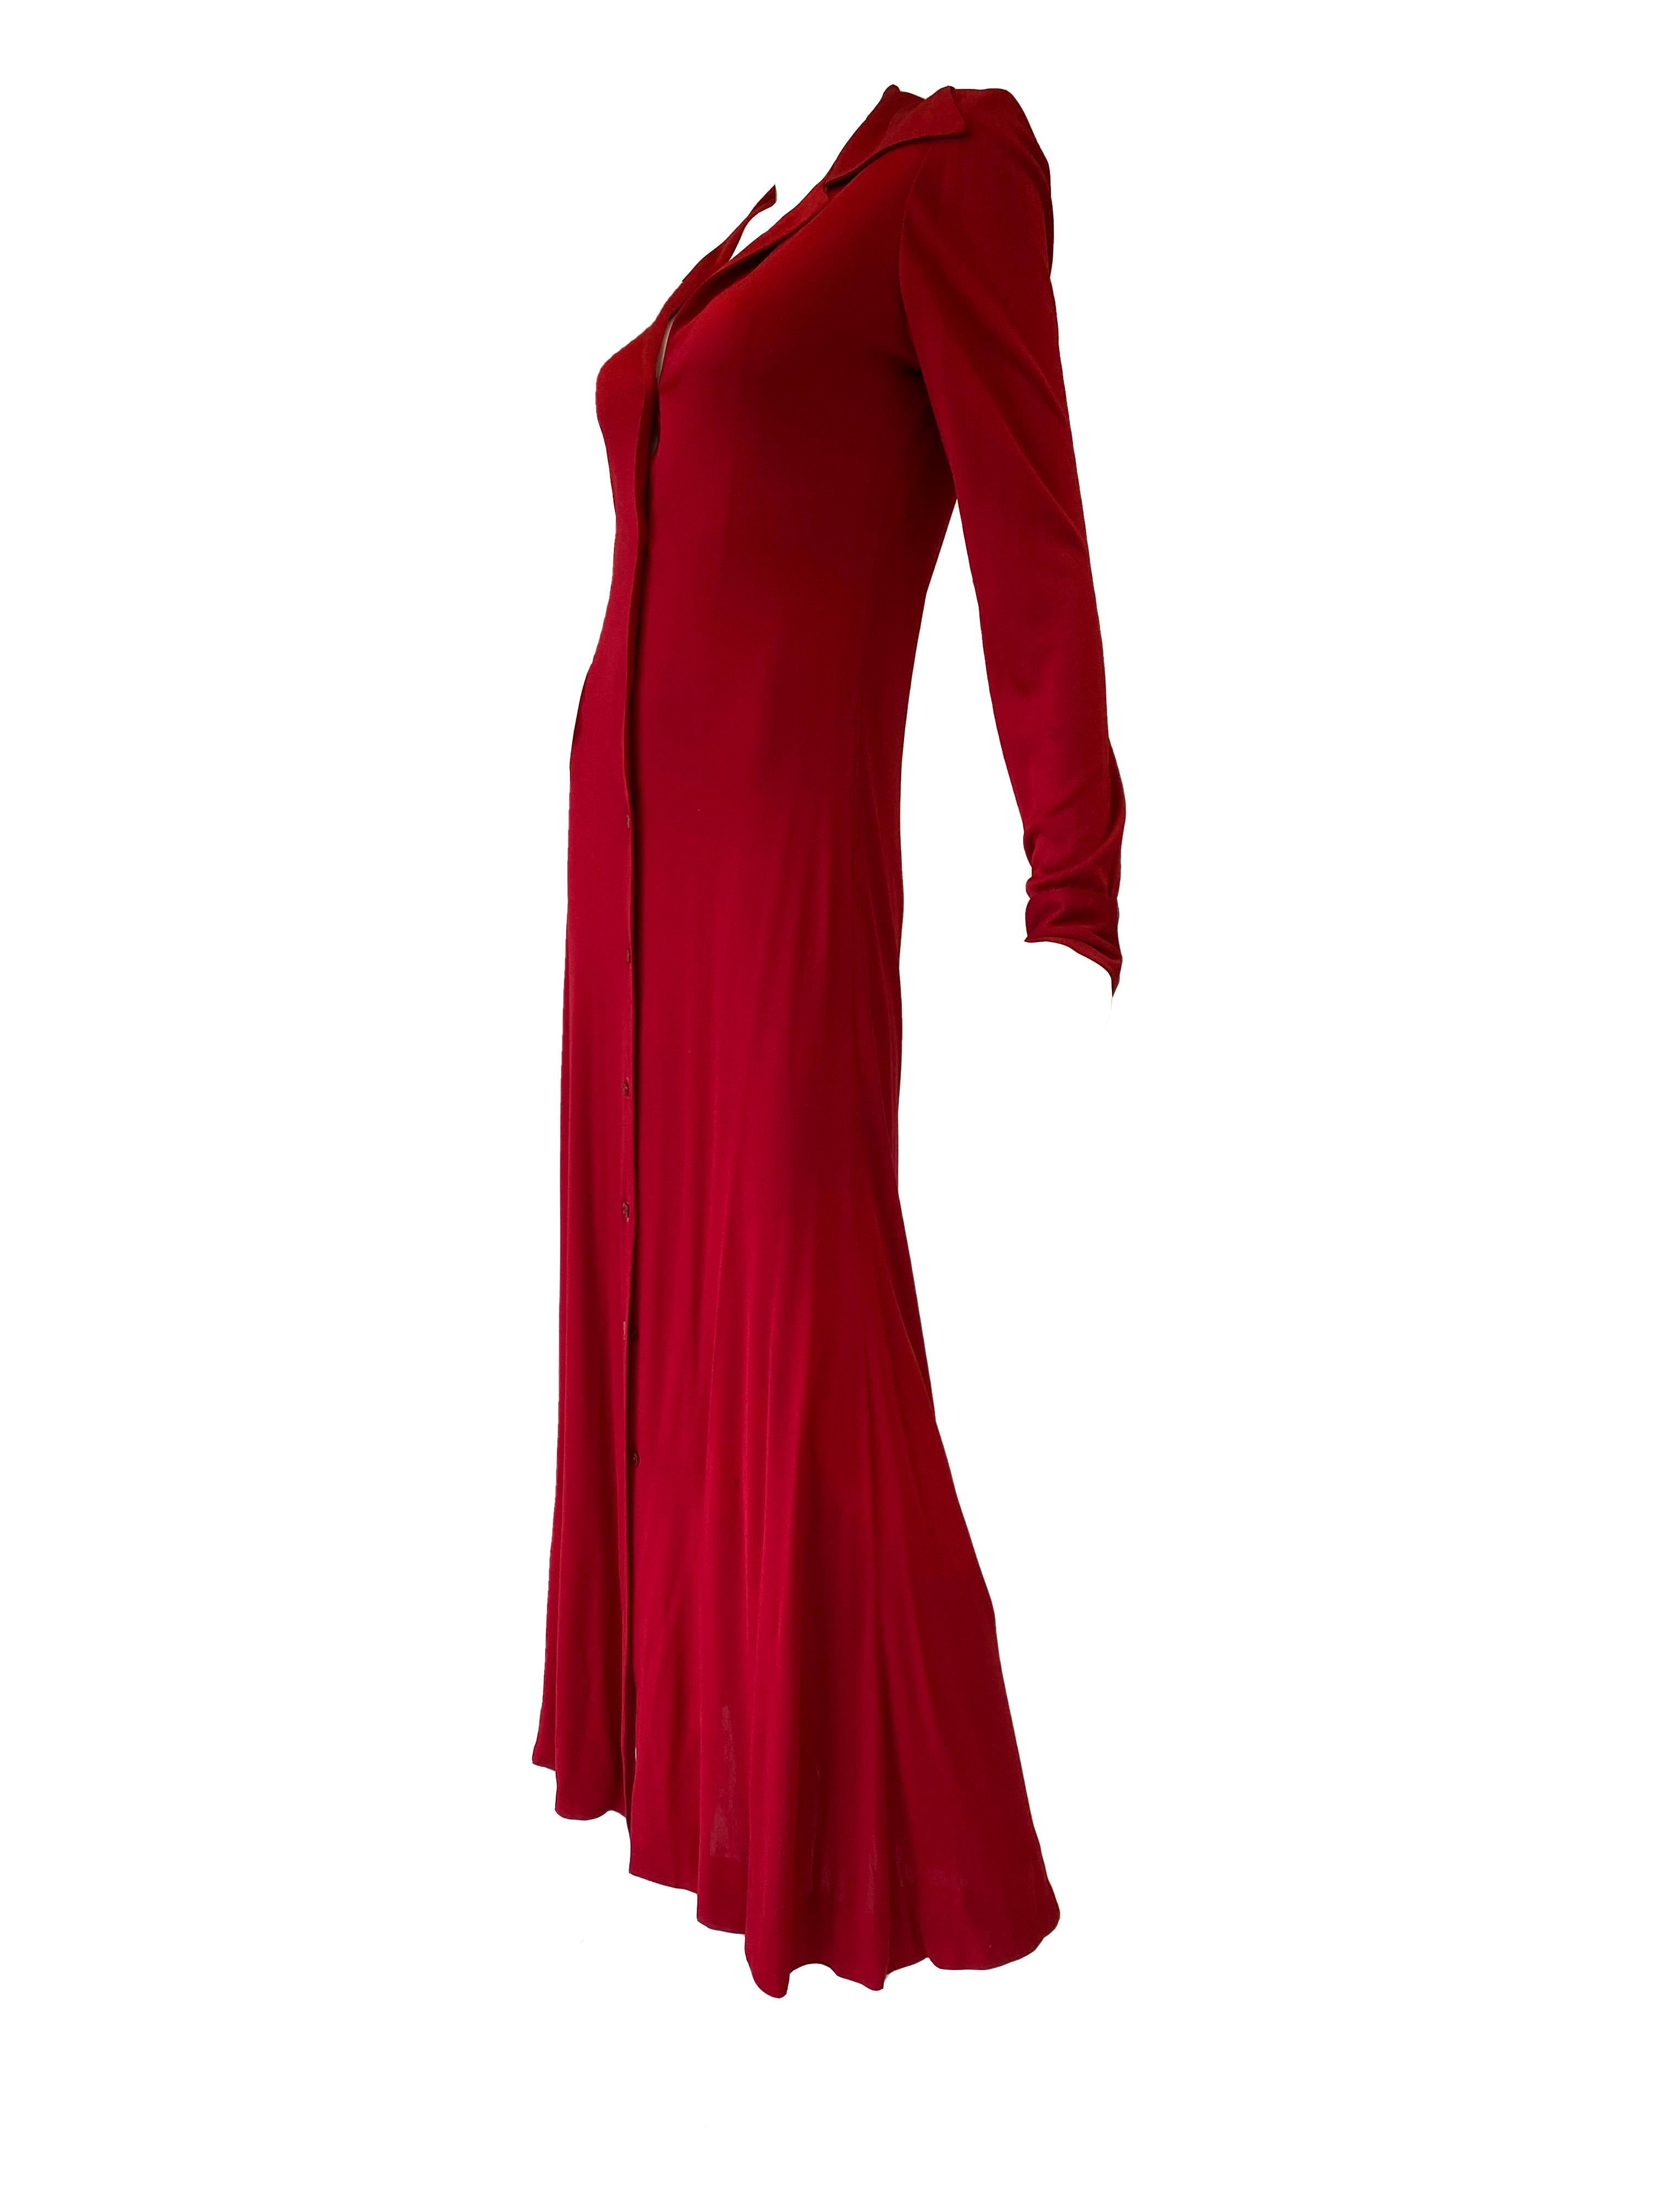 1972 Halston Red Jersey Knit Maxi Dress  In Good Condition For Sale In Houston, TX